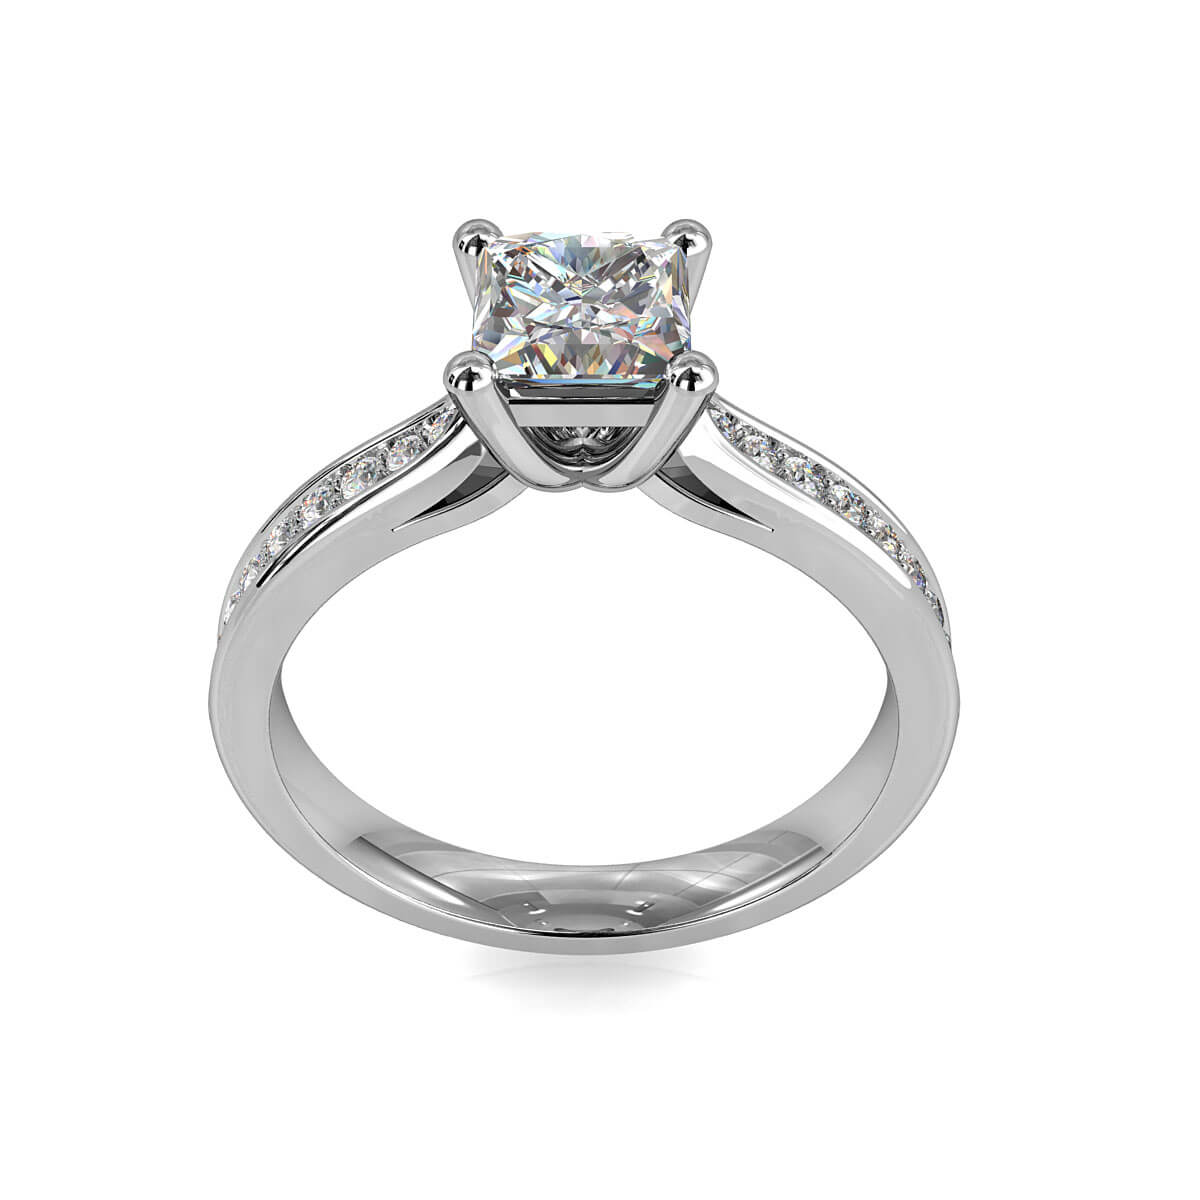 Princess Cut Solitaire Diamond Engagement Ring, 4 Claw Set on a Tapered Bead Set Band with Side Support Bar.